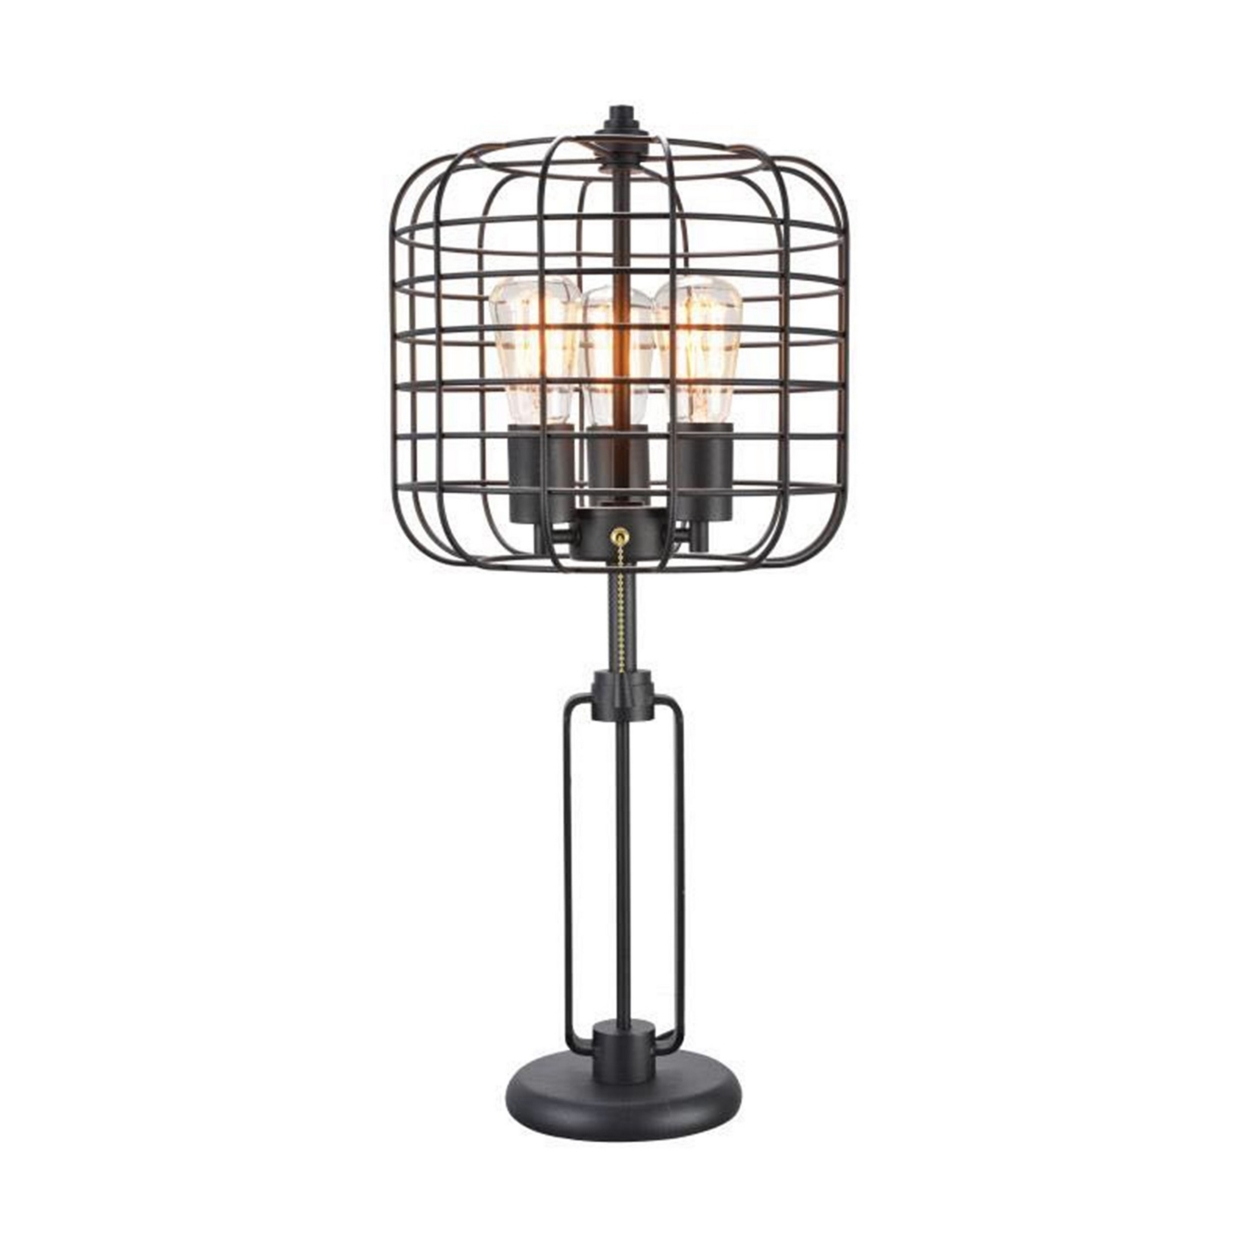 Cage Design Shade Metal Table Lamp With Pull Chain Switch, Black- Saltoro Sherpi